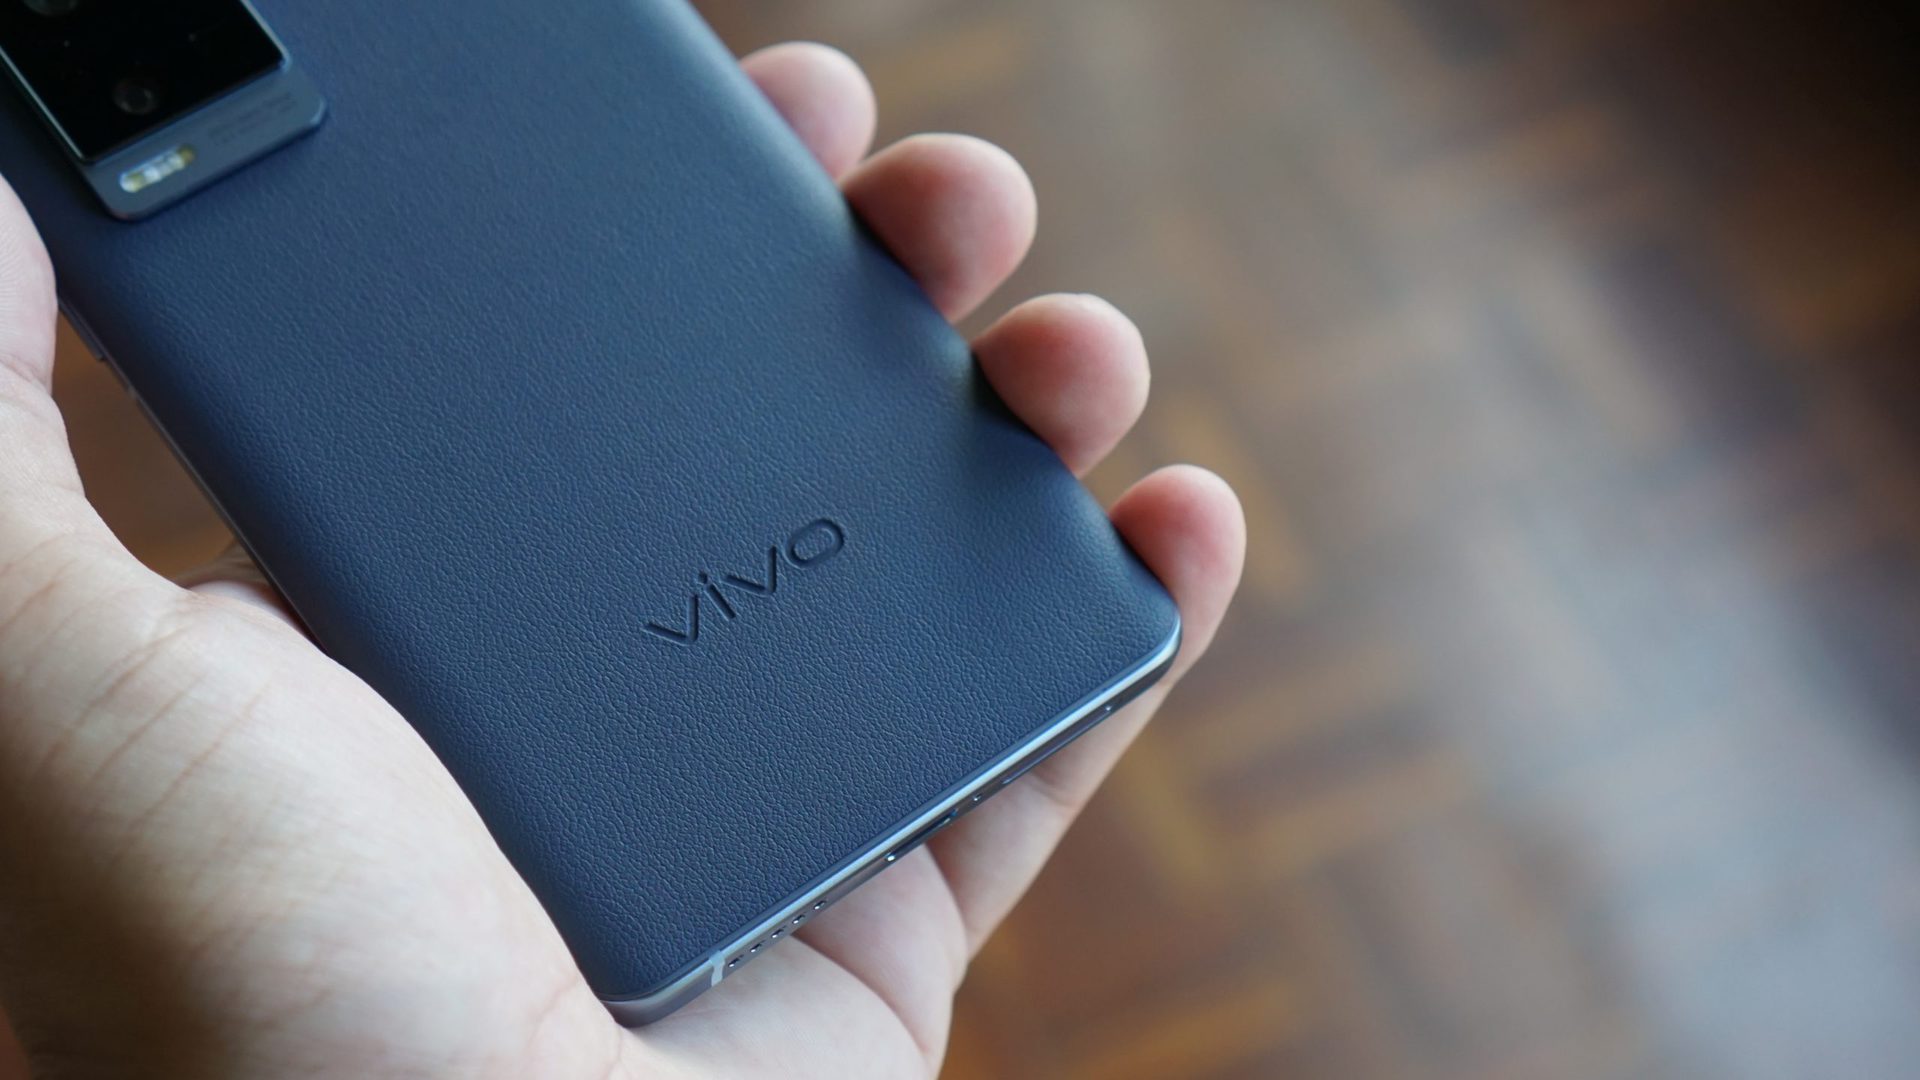 vivo X60 Pro Plus review: A flagship for camera enthusiasts